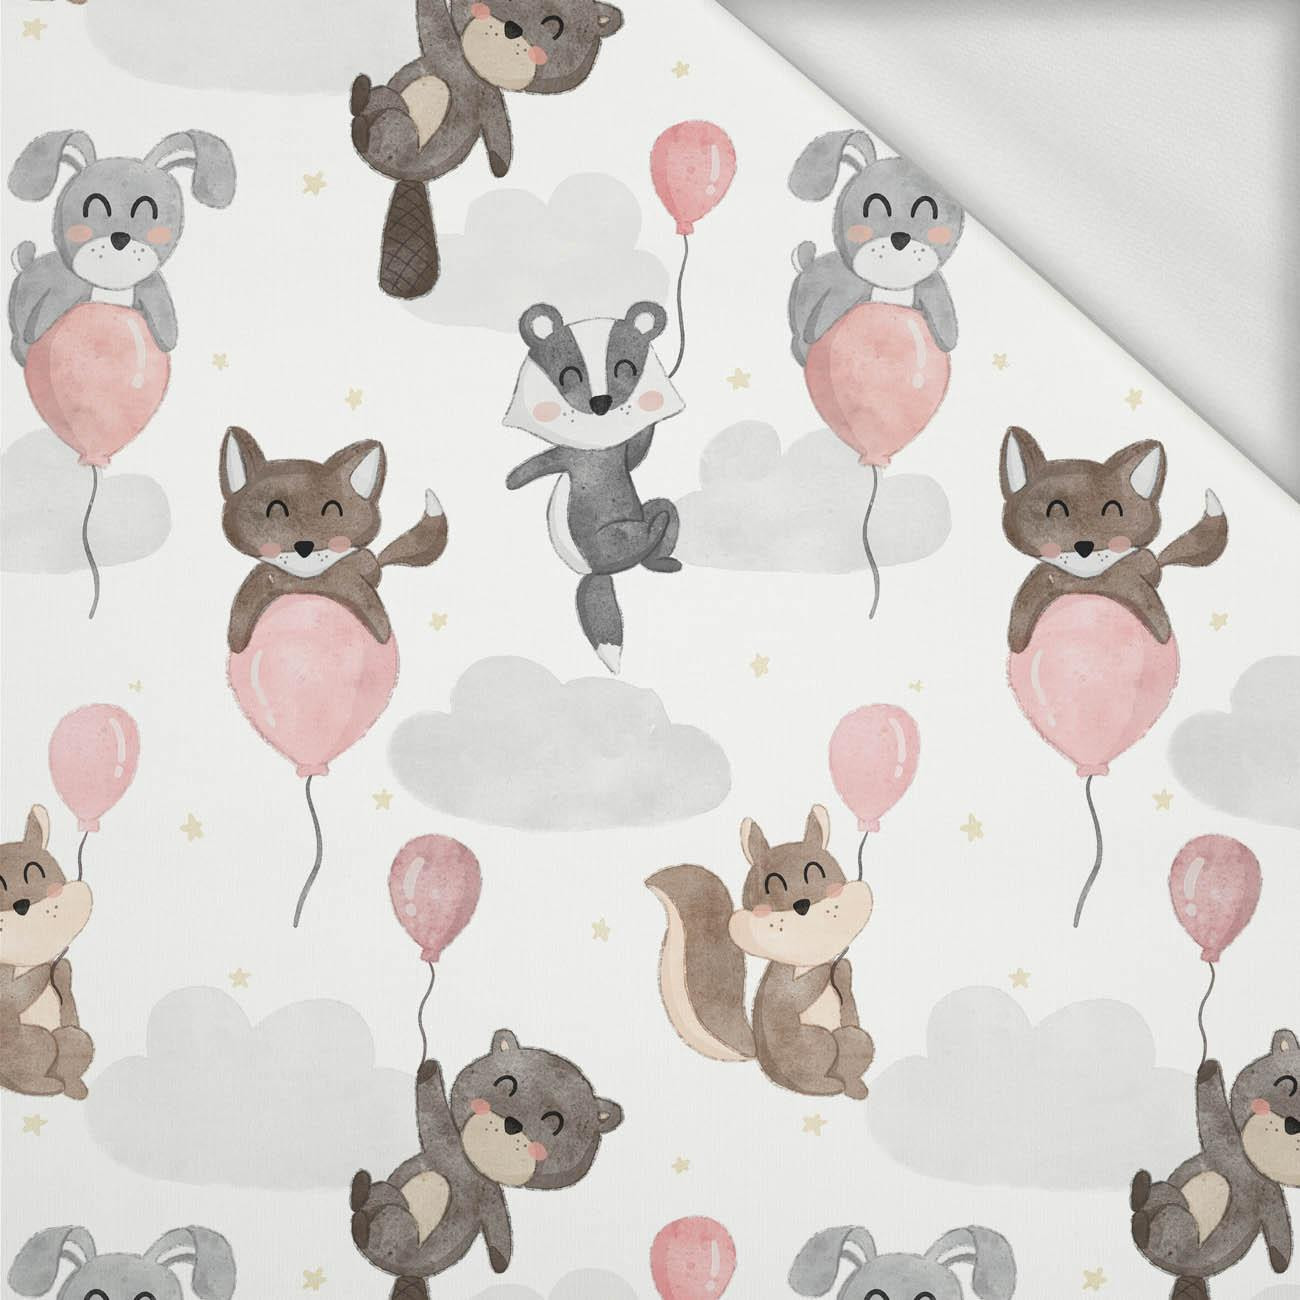 ANIMALS IN CLOUDS pat. 1 - organic looped knit fabric